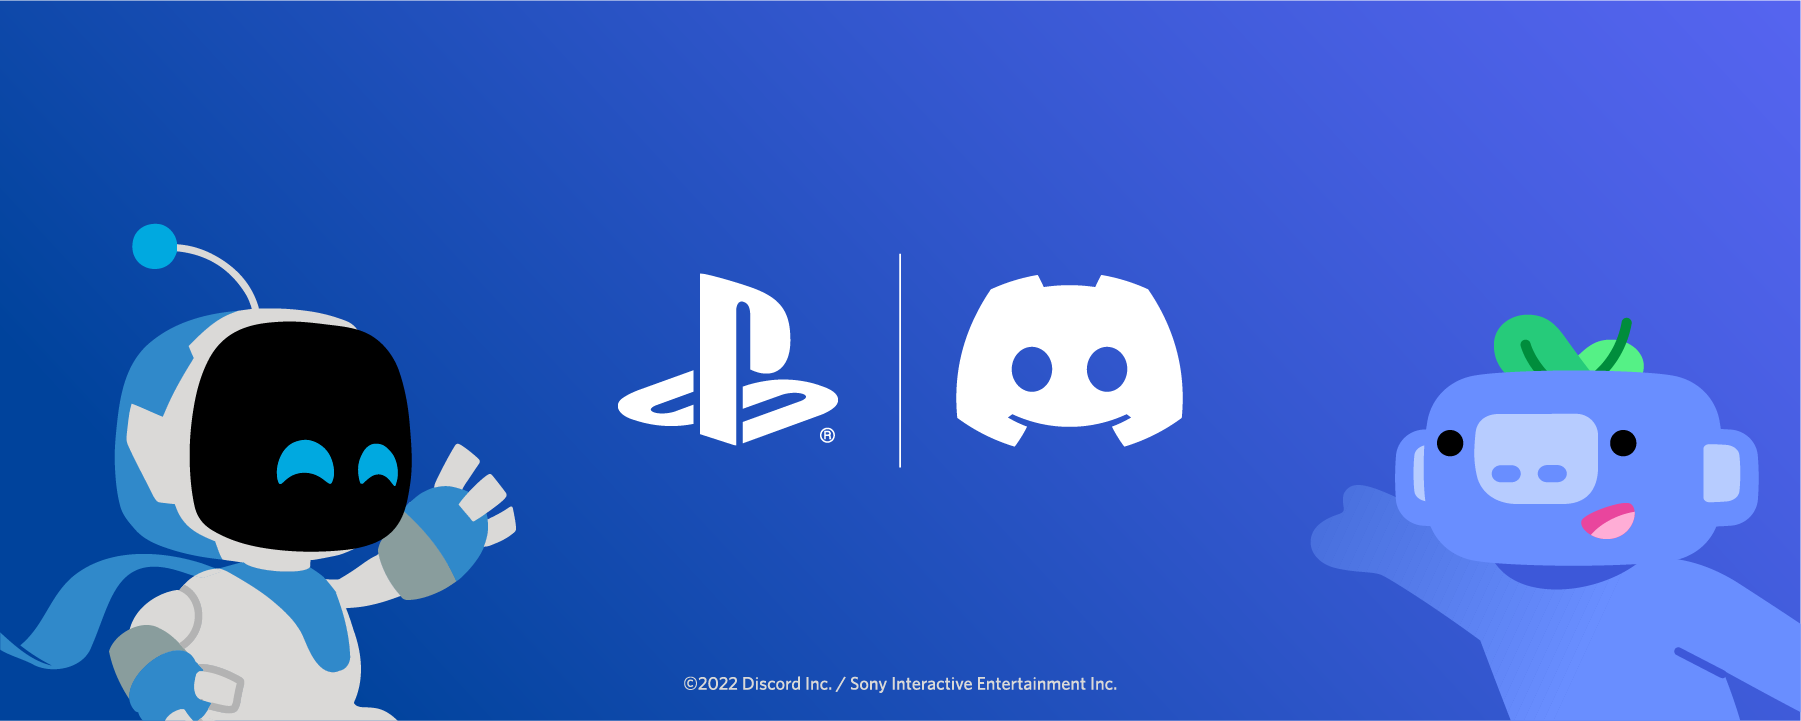 Players Can Now Link Their PlayStation Network Account to Discord 1